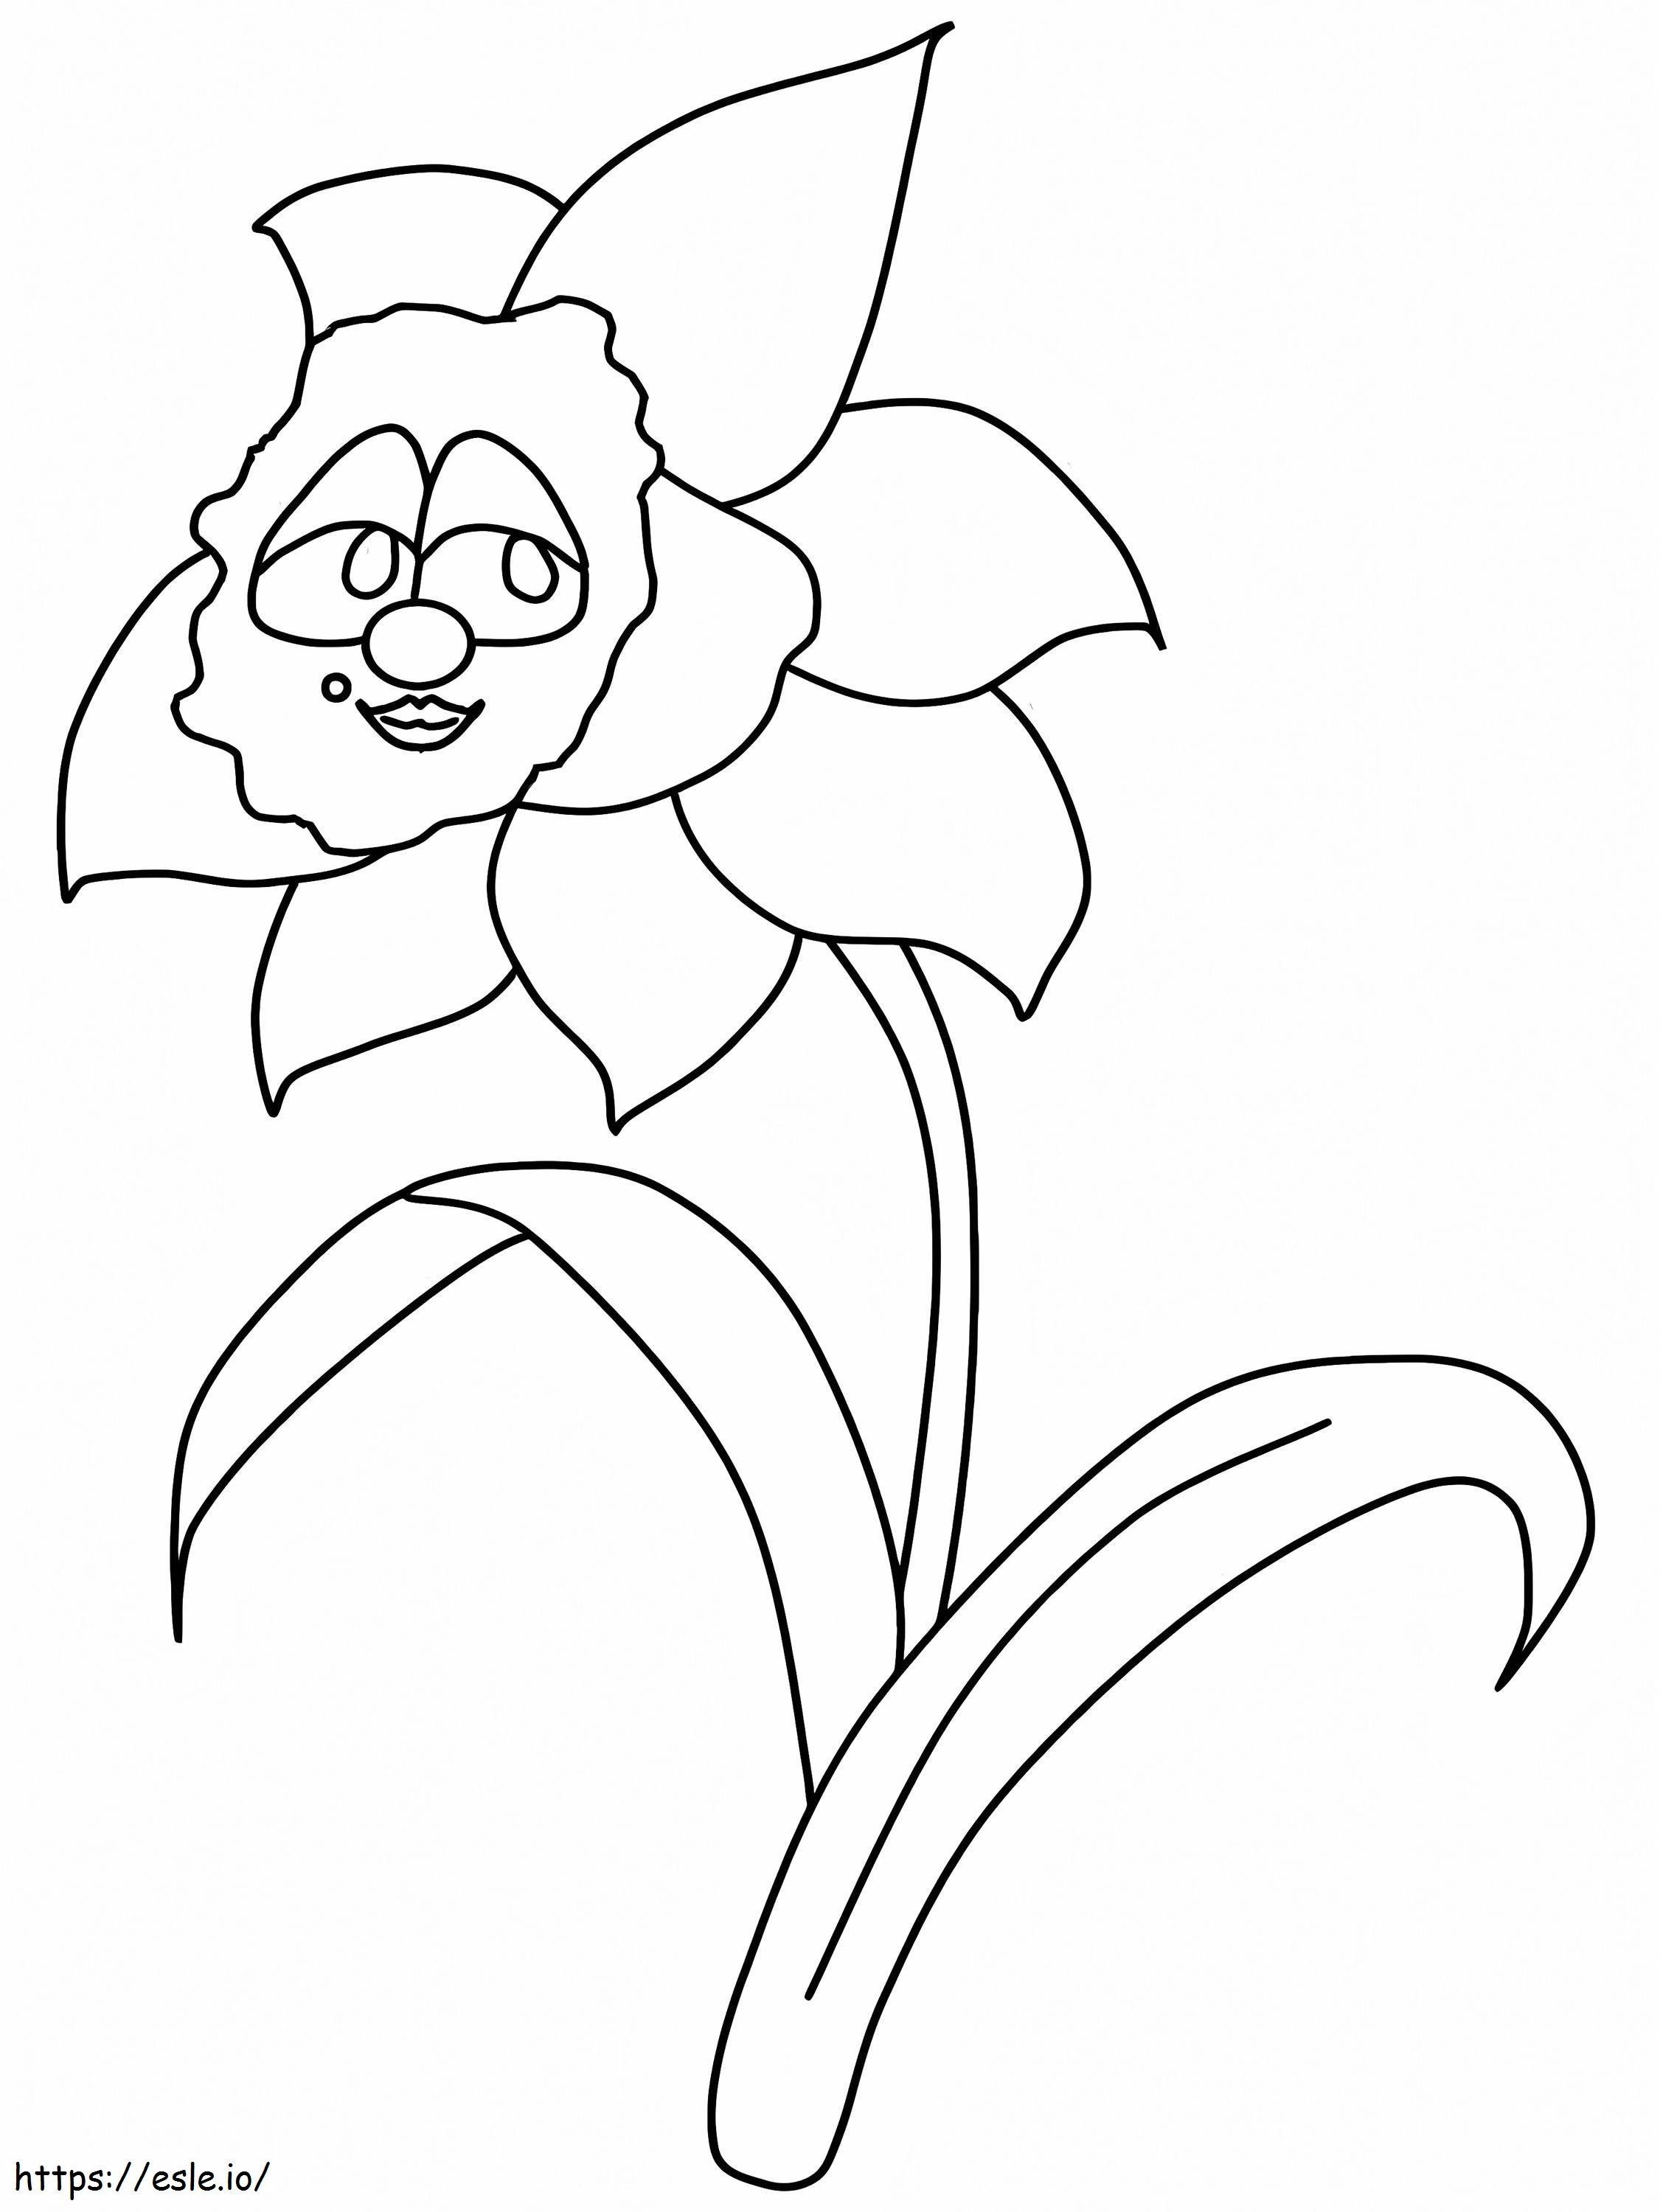 Funny Daffodil coloring page